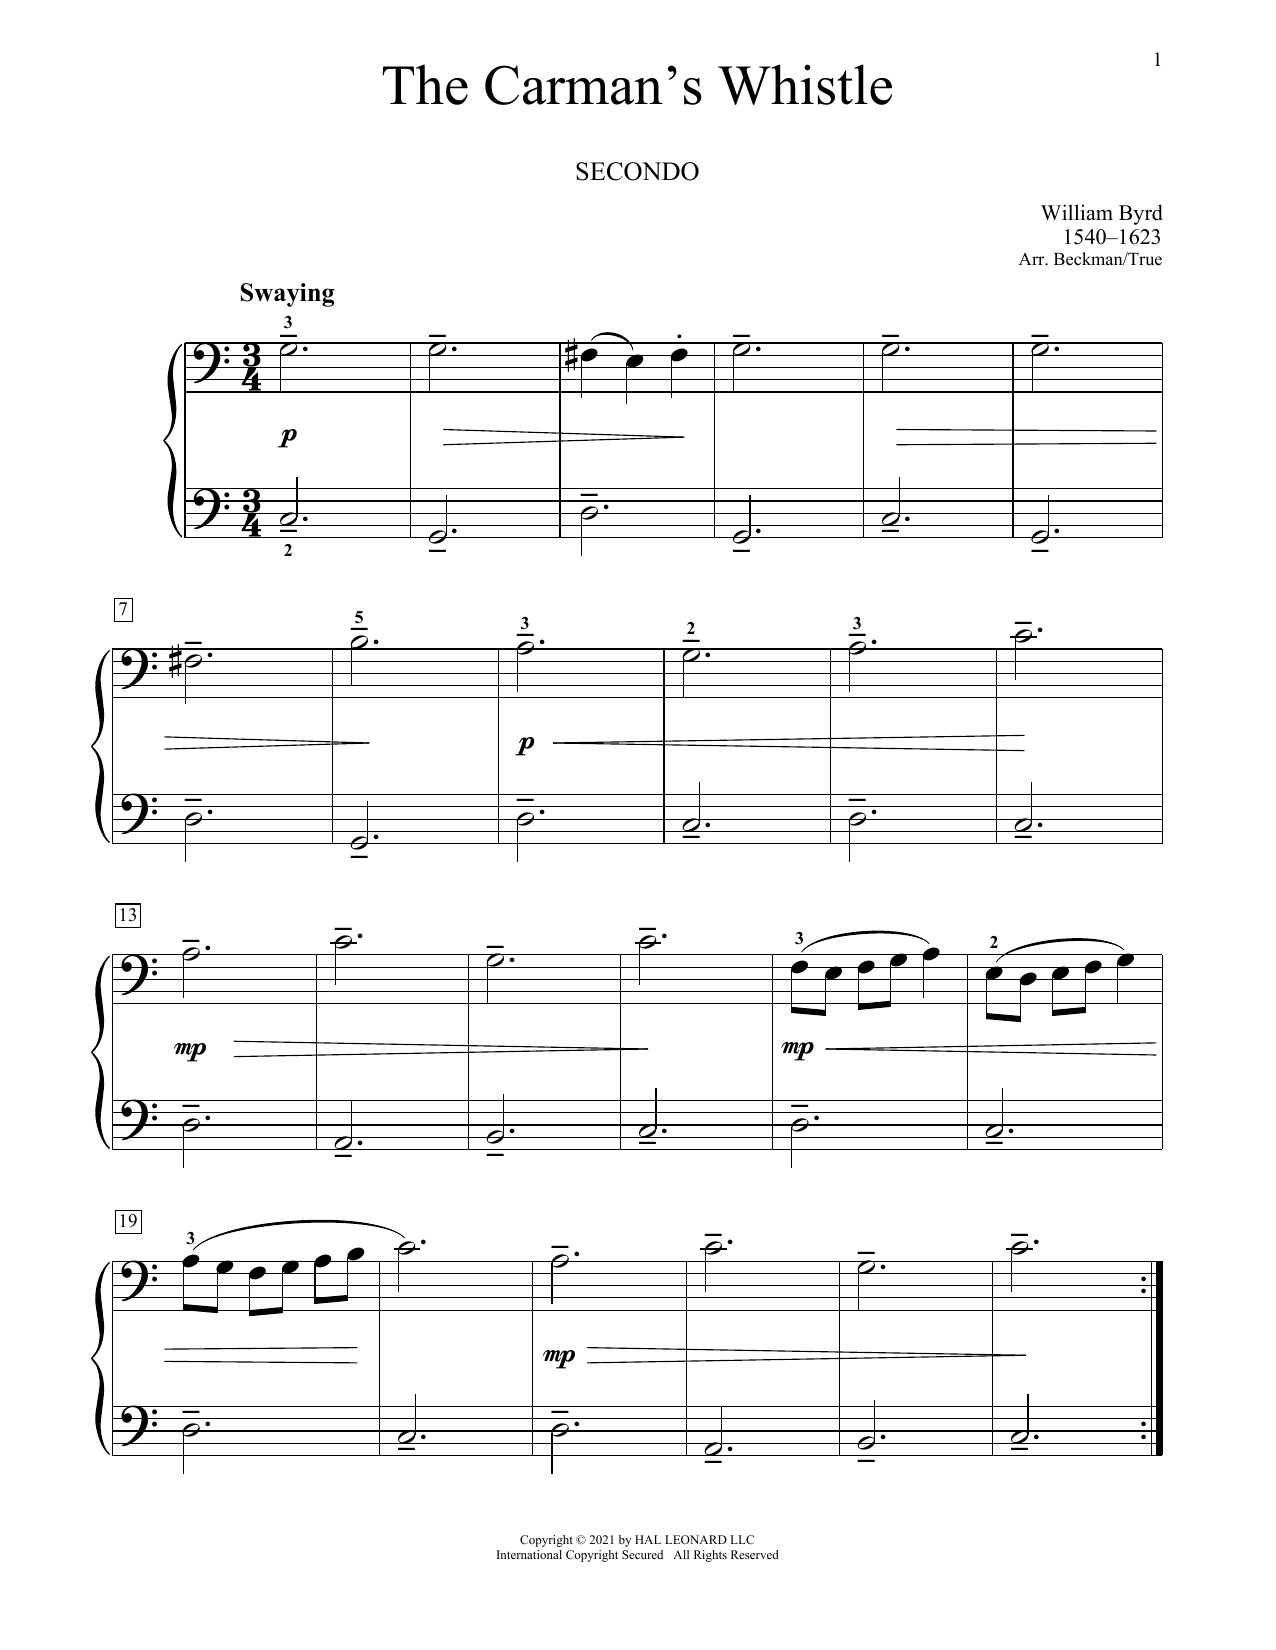 Download William Byrd The Carman's Whistle Sheet Music